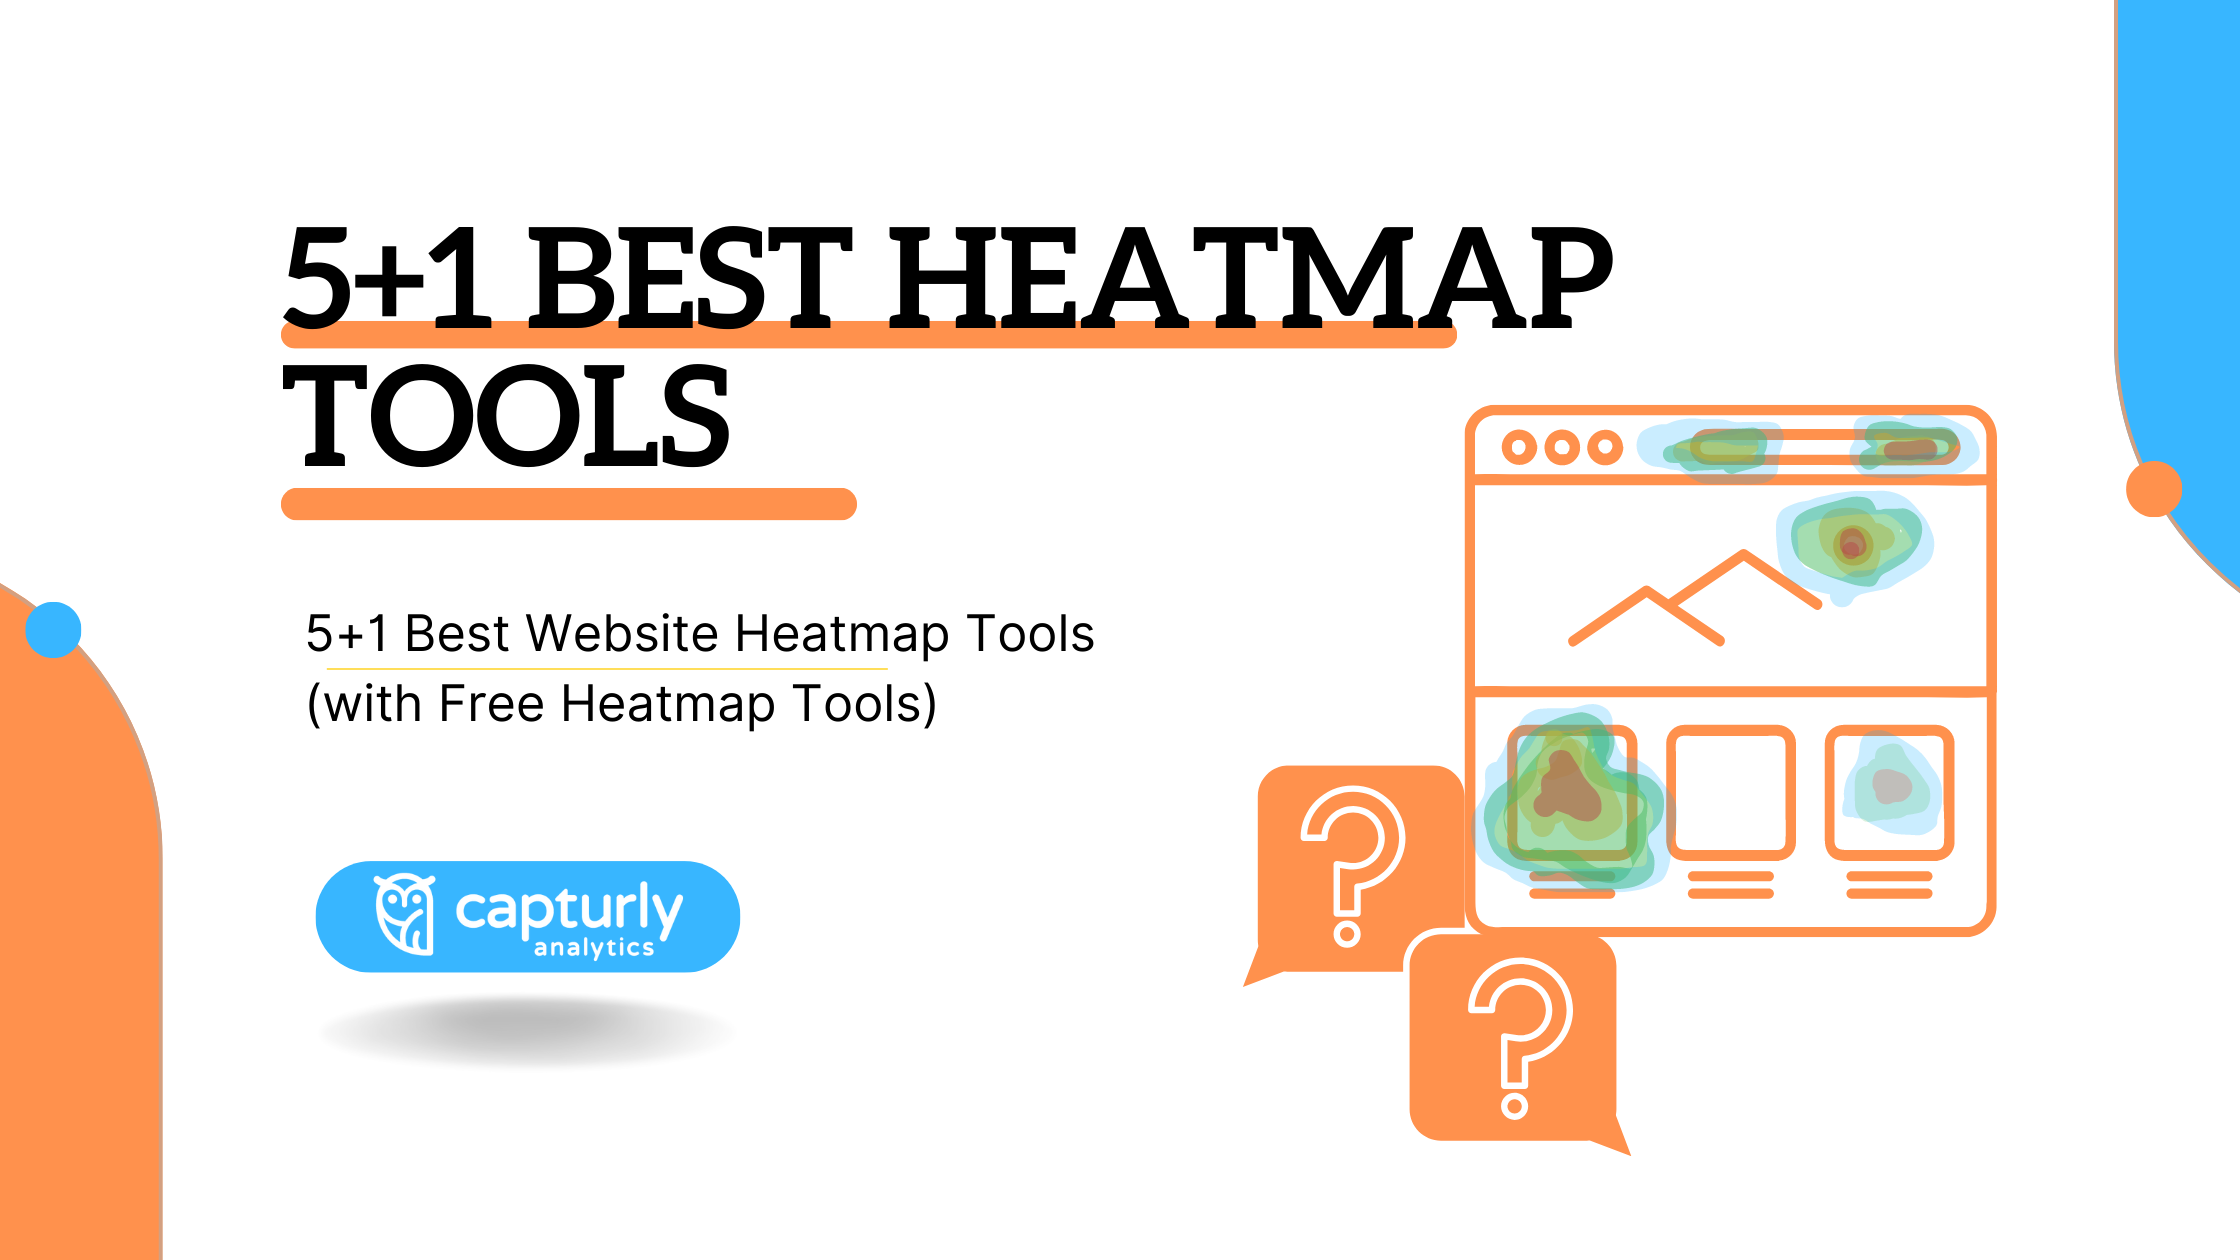 The title: 5+1 Best Website Heatmap Tools (with Free Heatmap Tools). And an image of a heatmap.